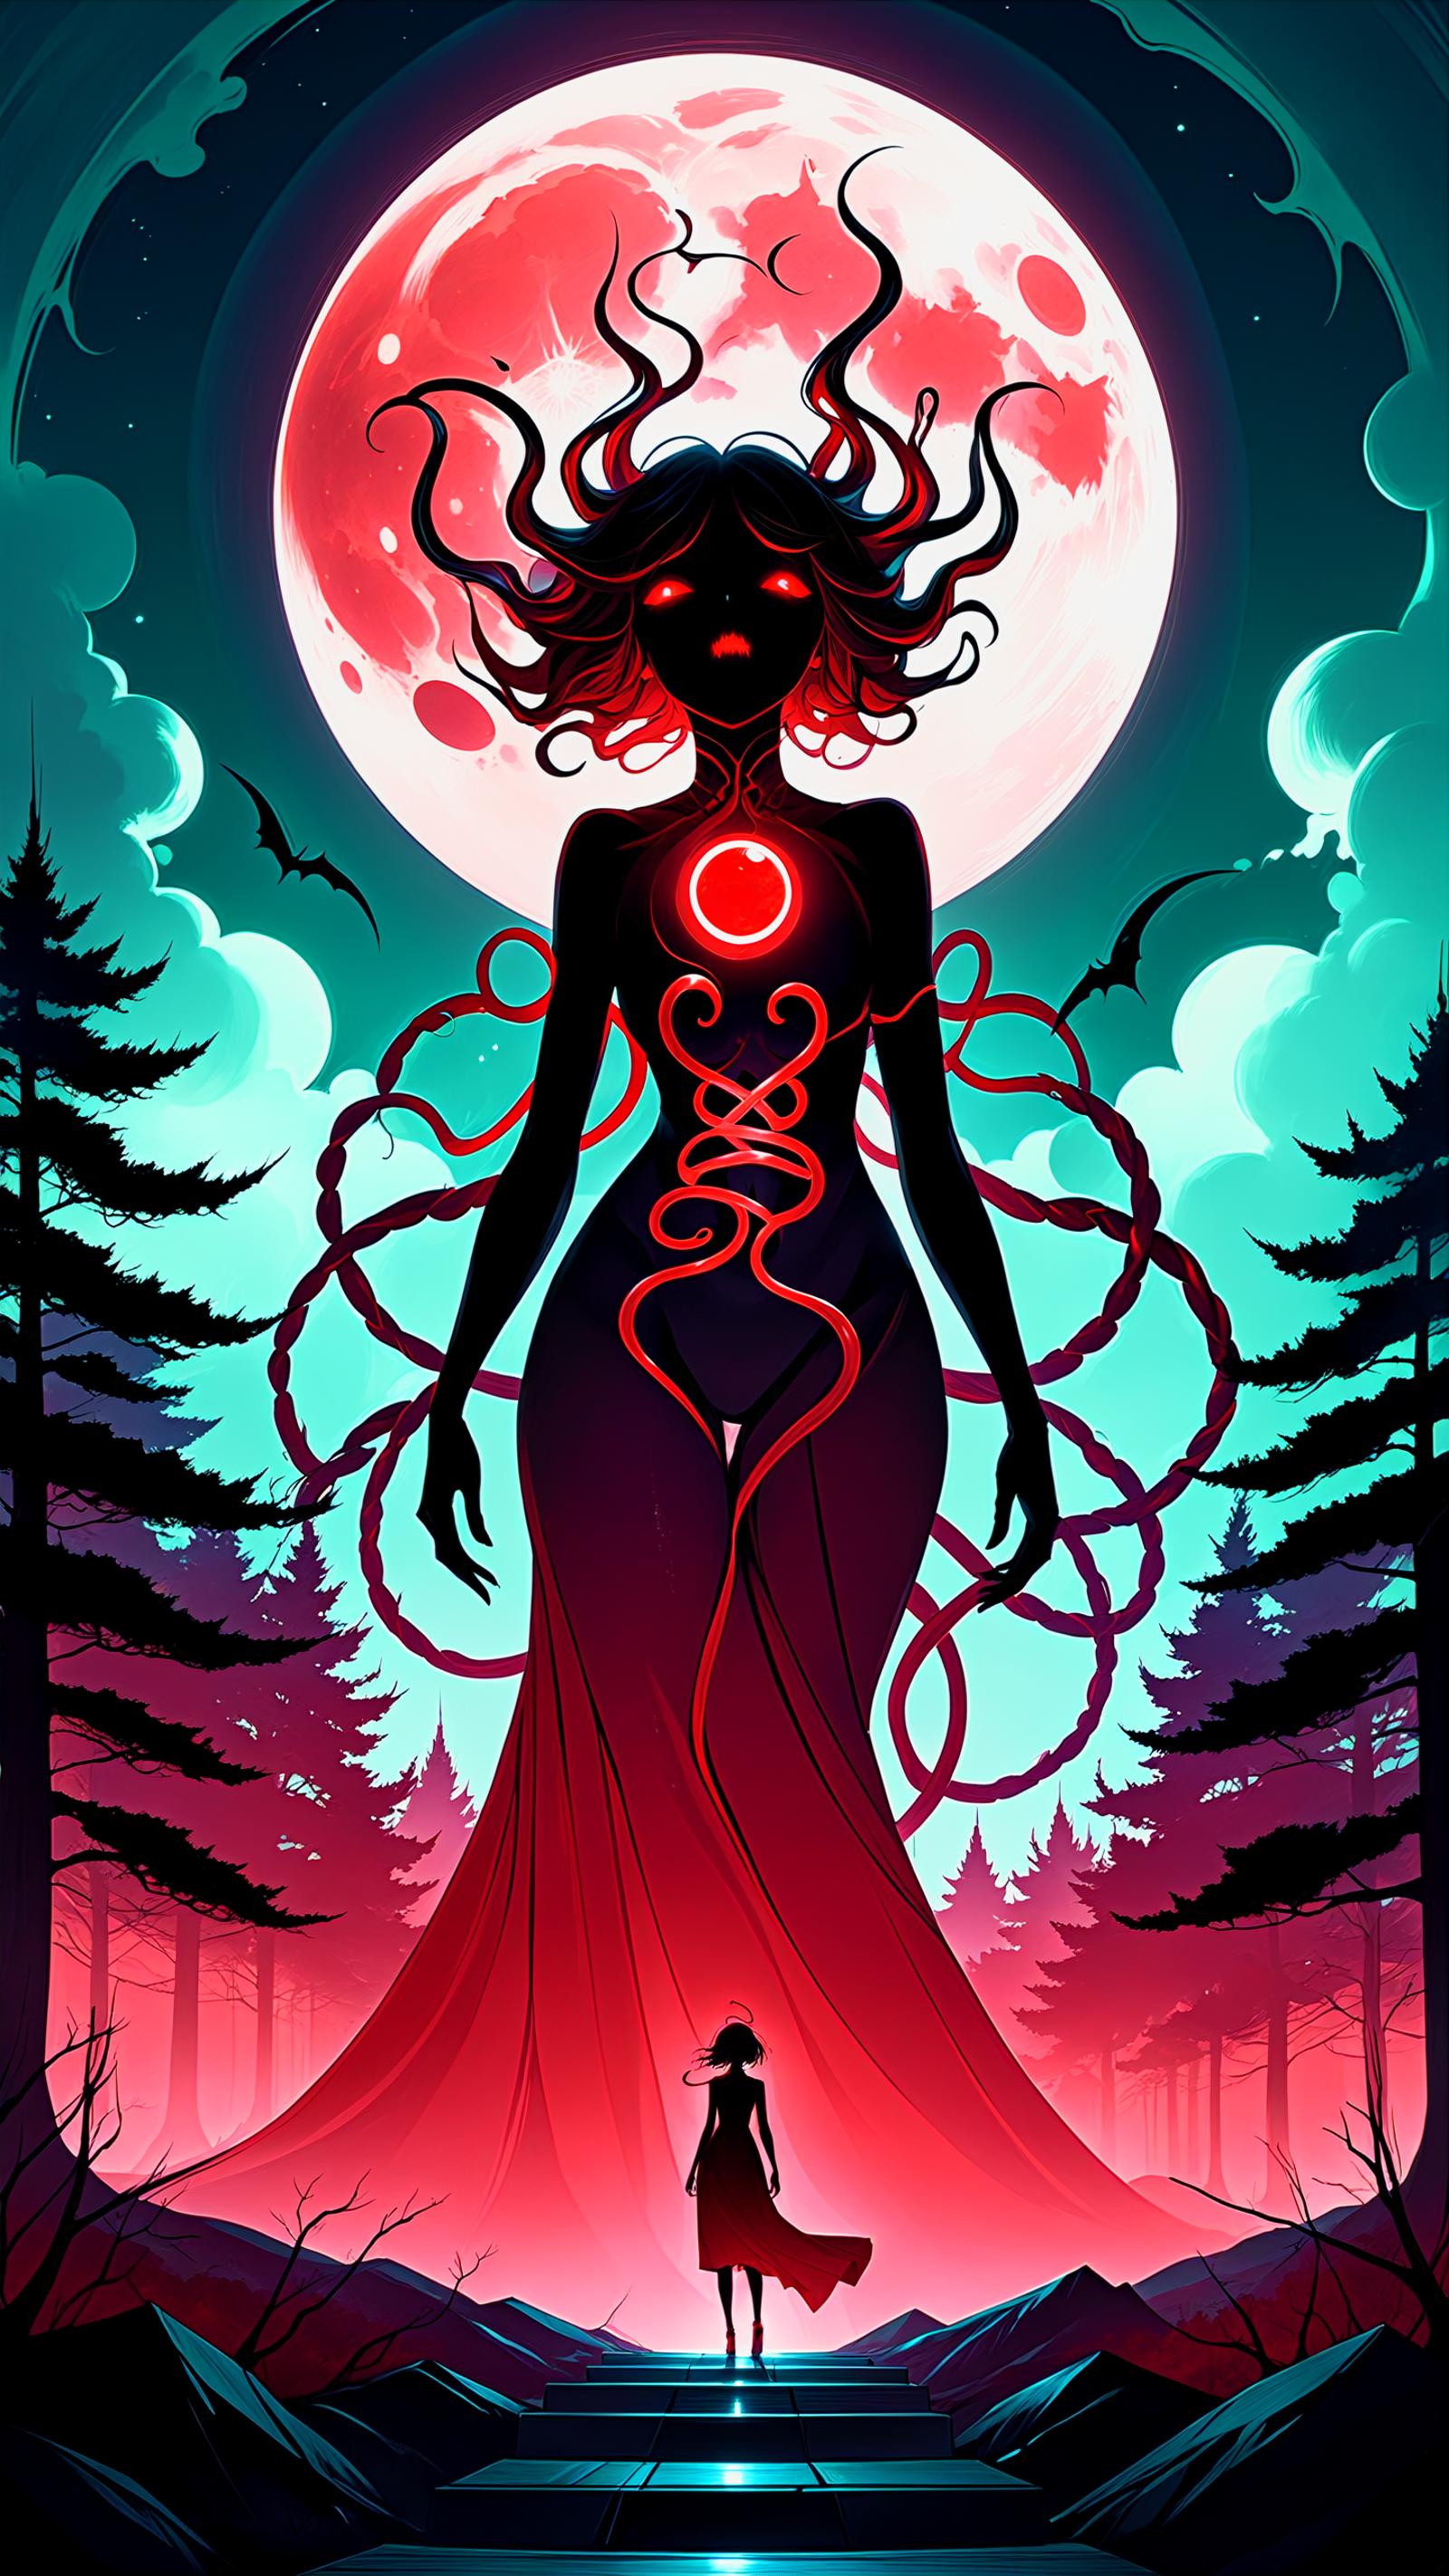 A dark, surreal drawing of a woman with a red dress and a glowing red heart on her chest, standing in the woods at night. She is surrounded by a forest and the full moon is visible in the background.